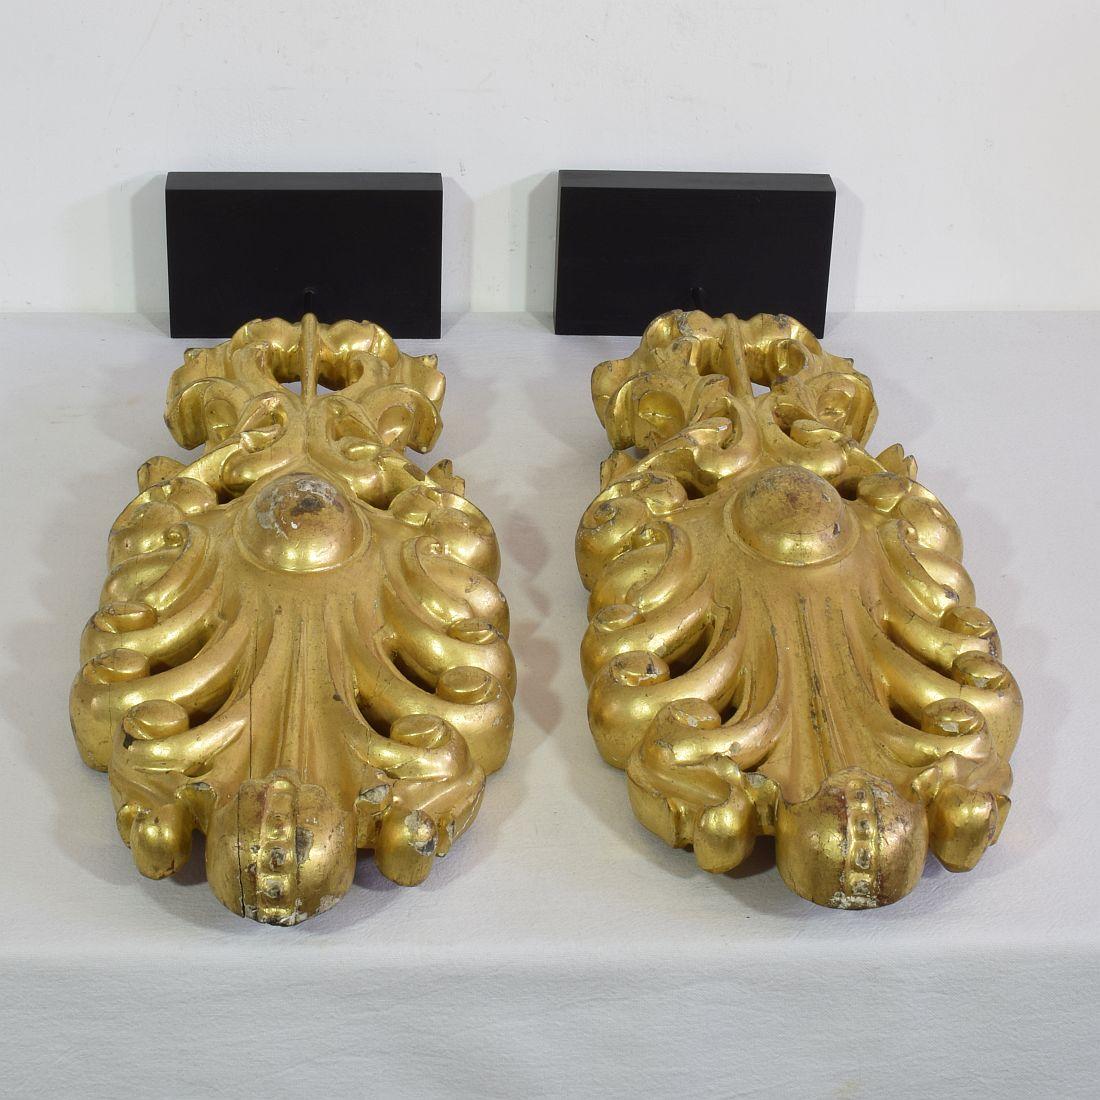 Pair Large 18th Century Italian Neoclassical Carved Giltwood Ornaments 11